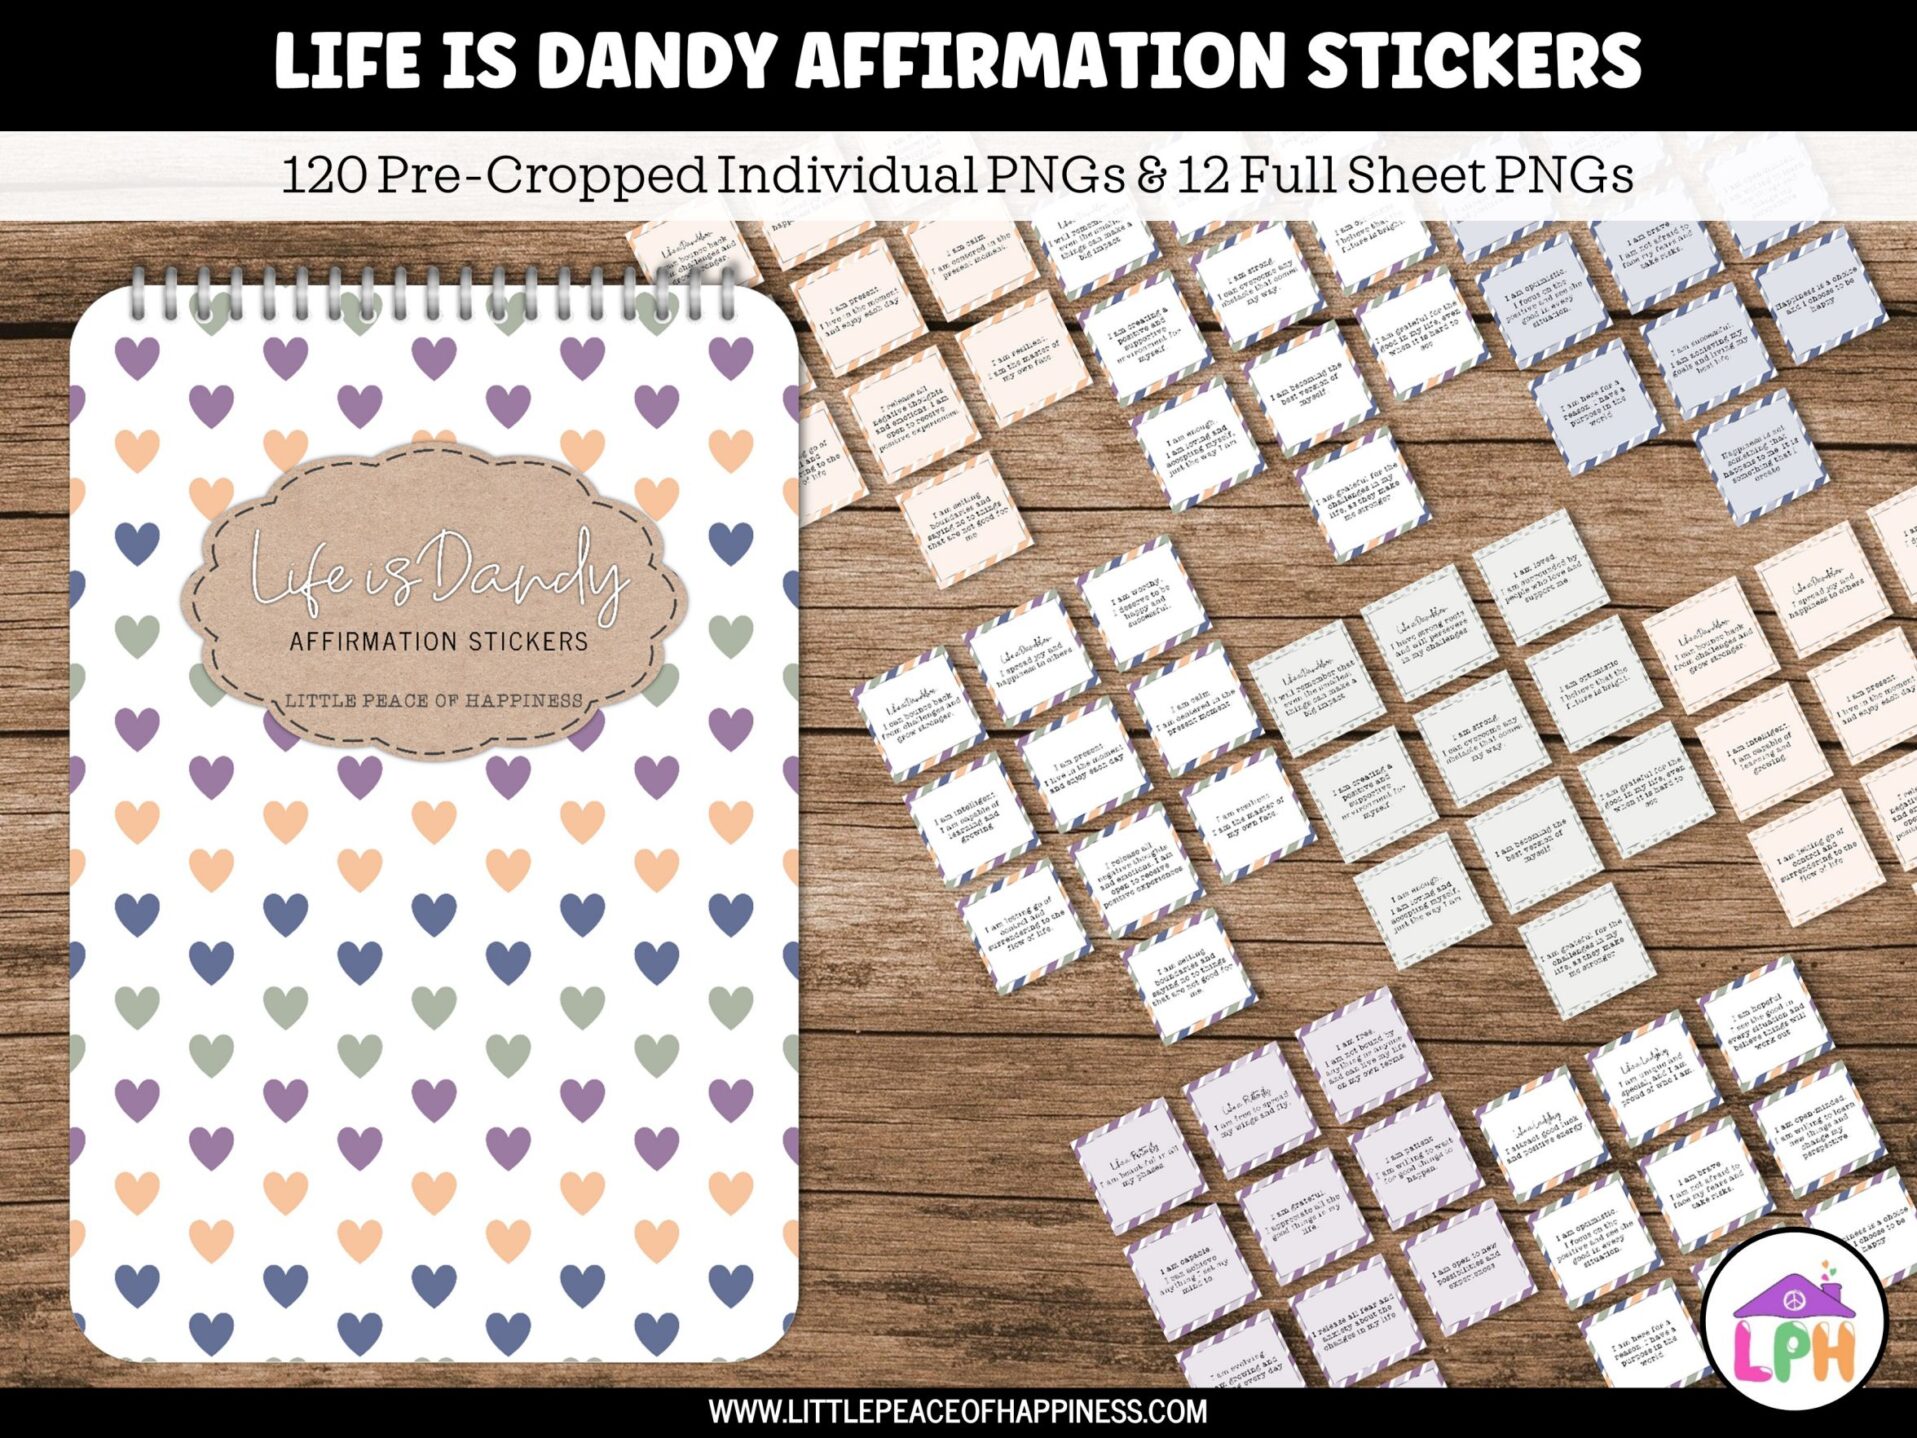 Pin on Positive Affirmation Digital Stickers